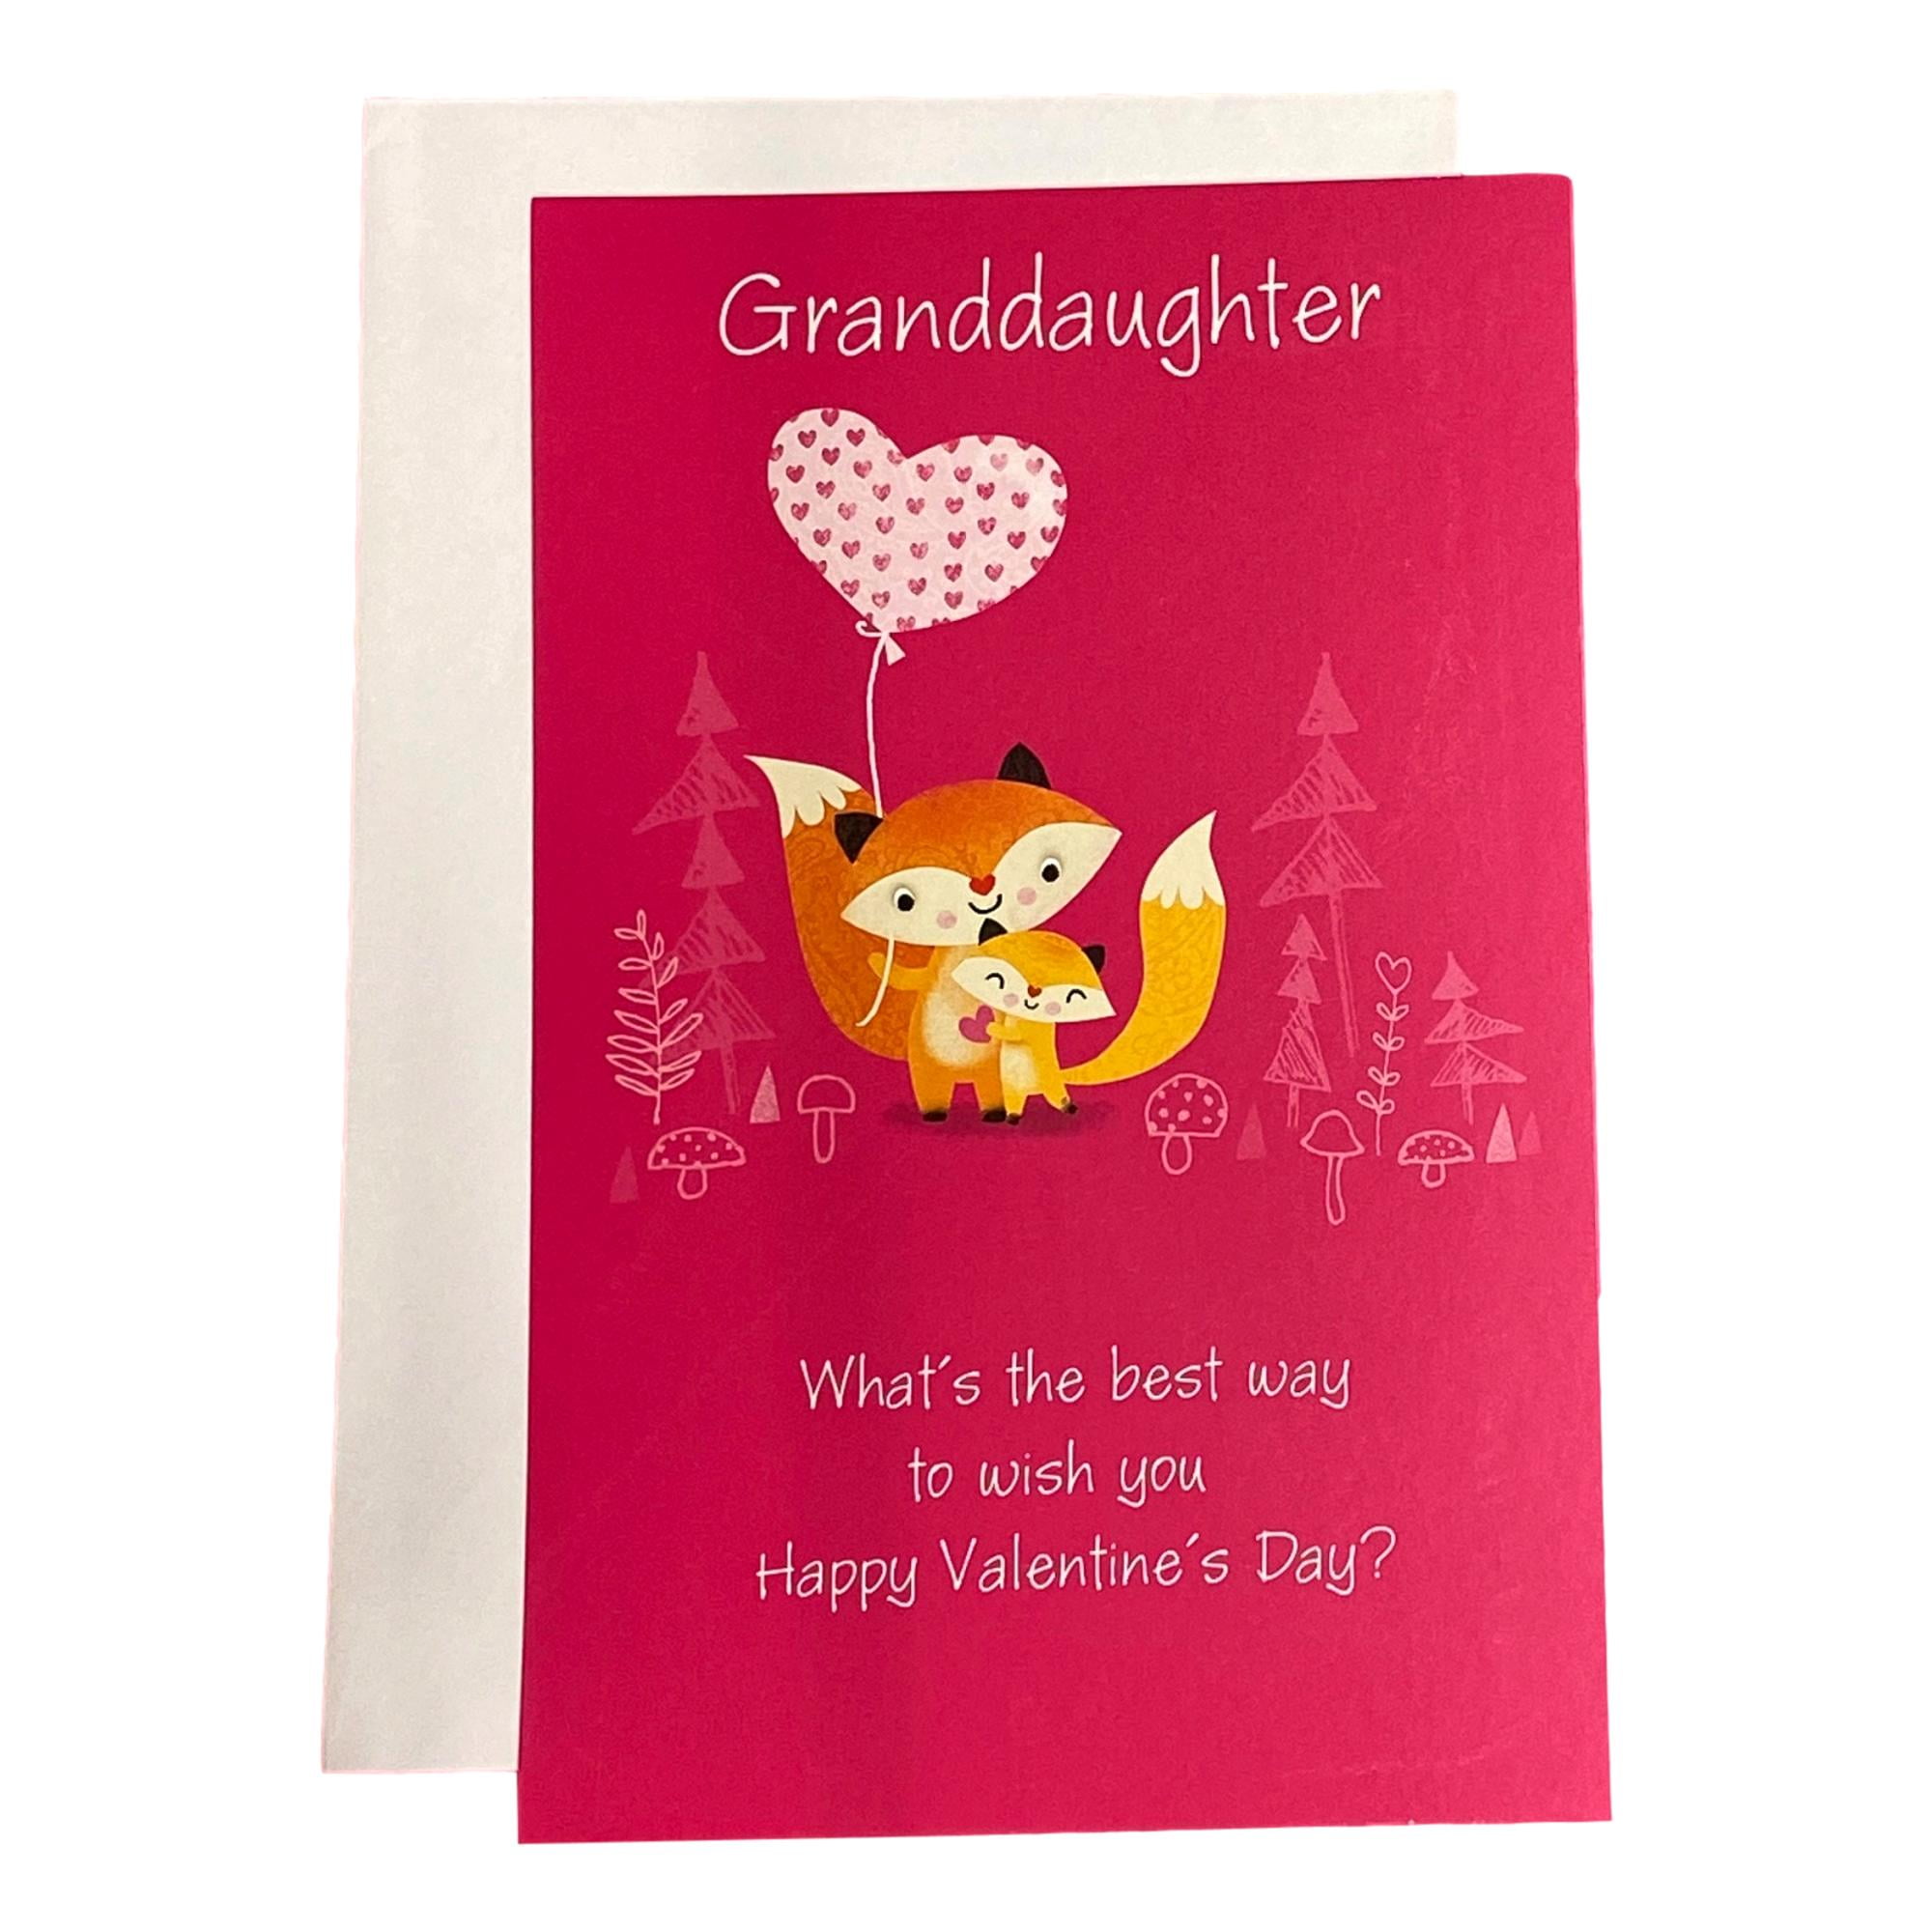 Valentine's Day Greeting Card for Grand daughter - Granddaughter What's the best way to wish you Happy Valentine's Day?; Fox, Plants - Walmart.com